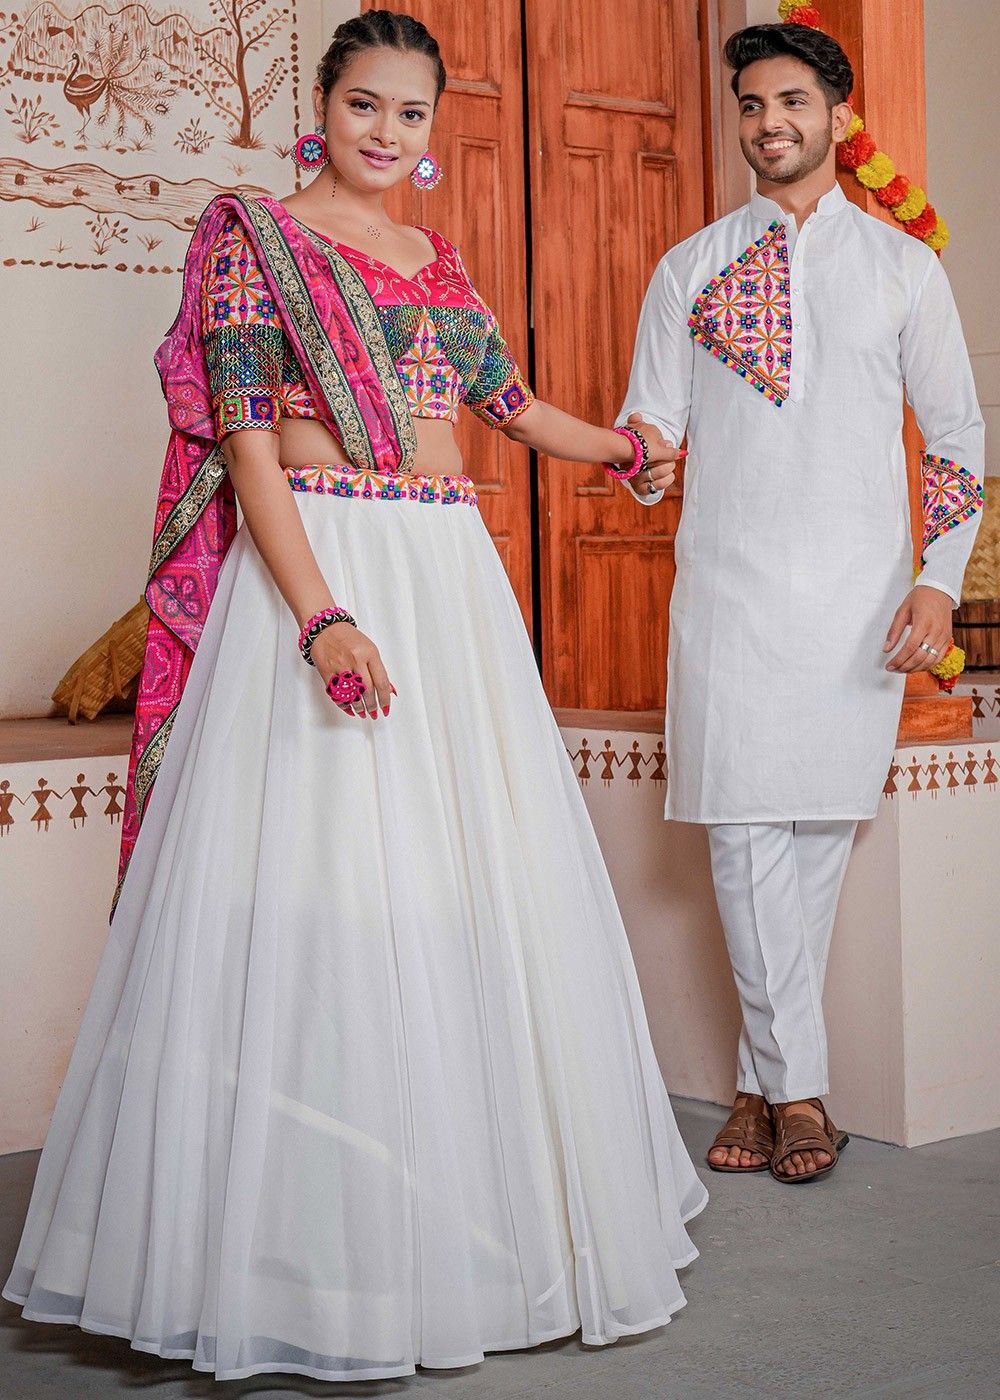 Traditional Indian couple matching dress. | Wedding matching outfits,  Matching couple outfits, Couple outfits